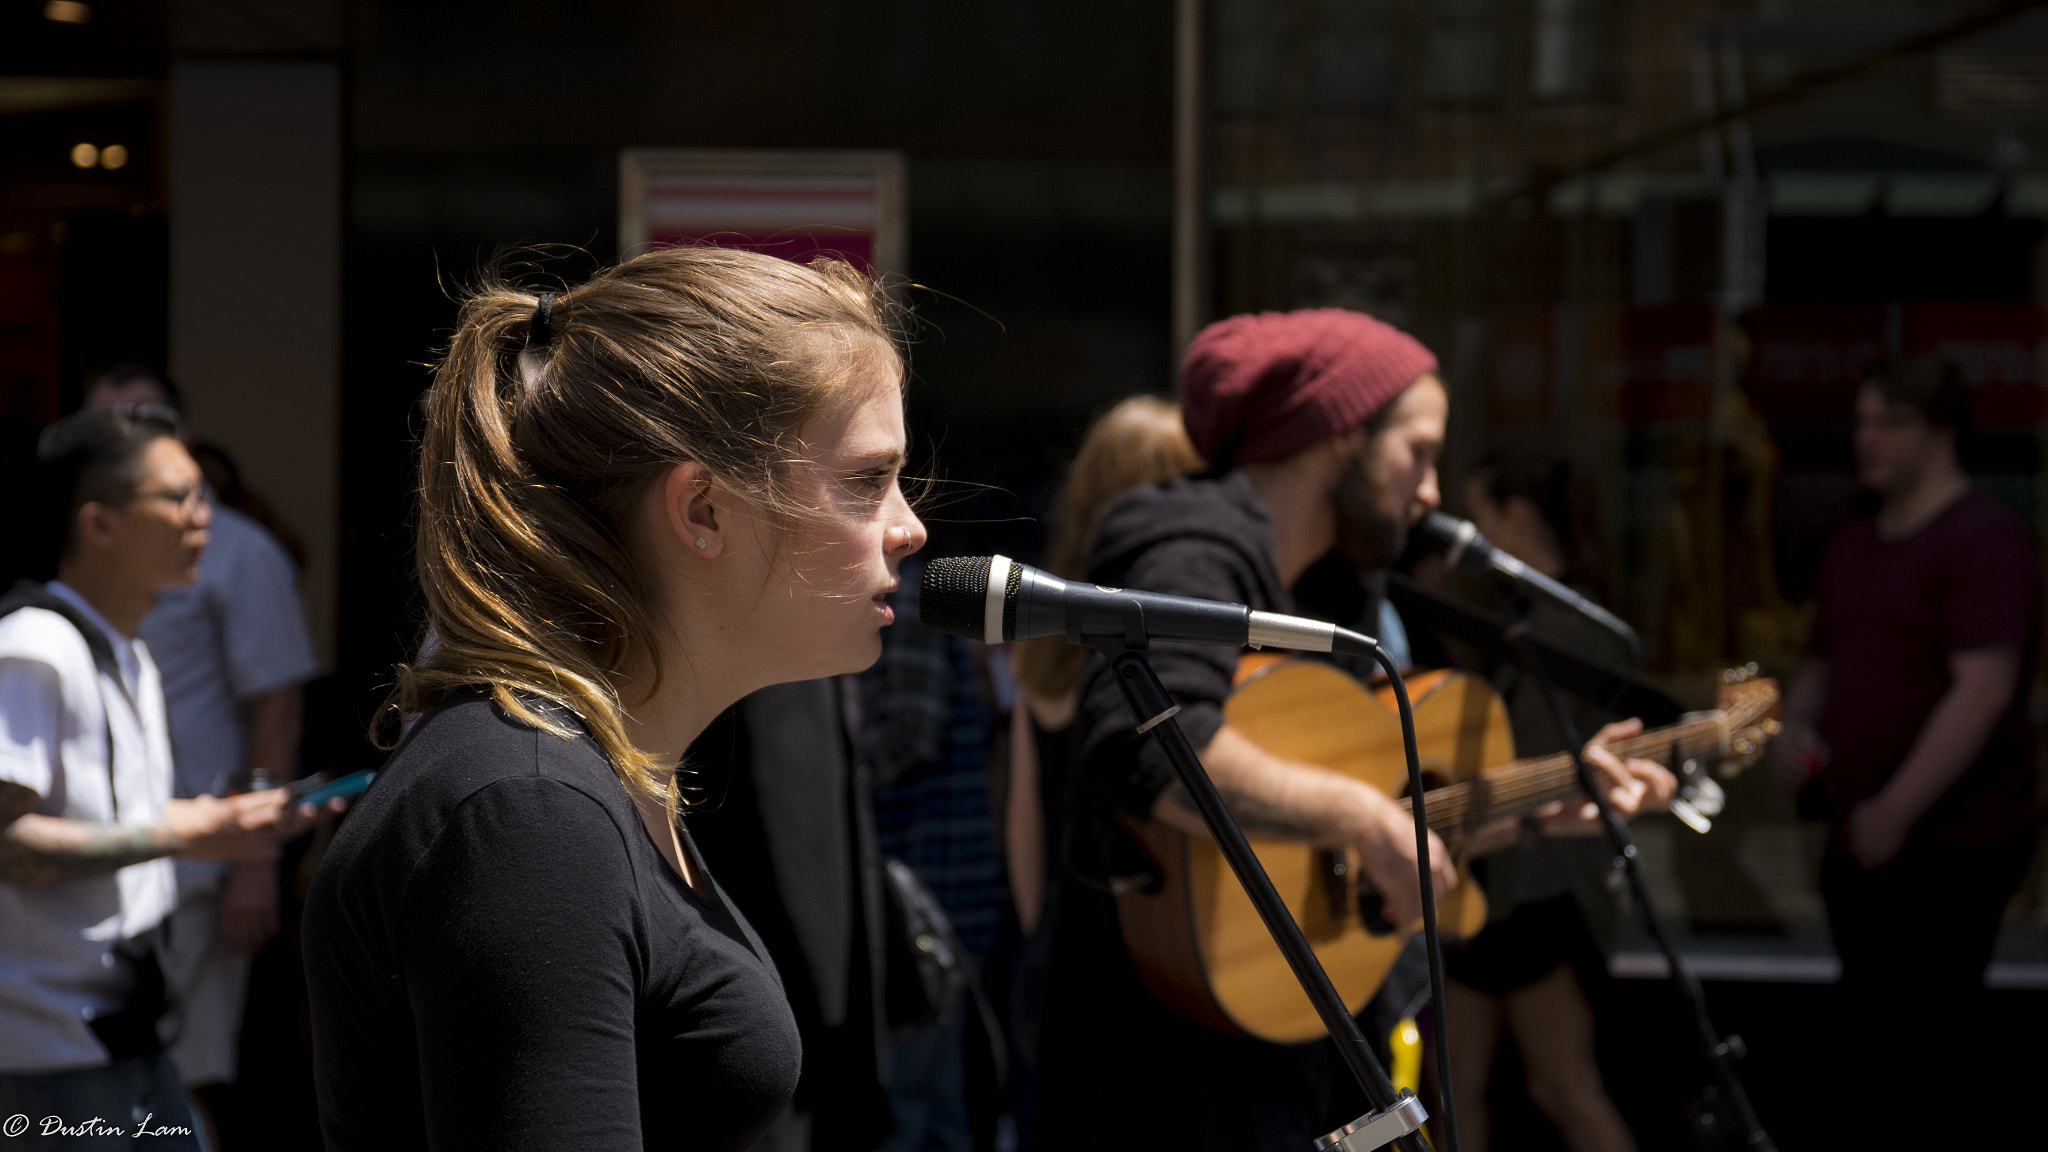 Sony a7R II + Sigma 50-200mm F4-5.6 DC OS HSM sample photo. Street performers in bourke street mall photography